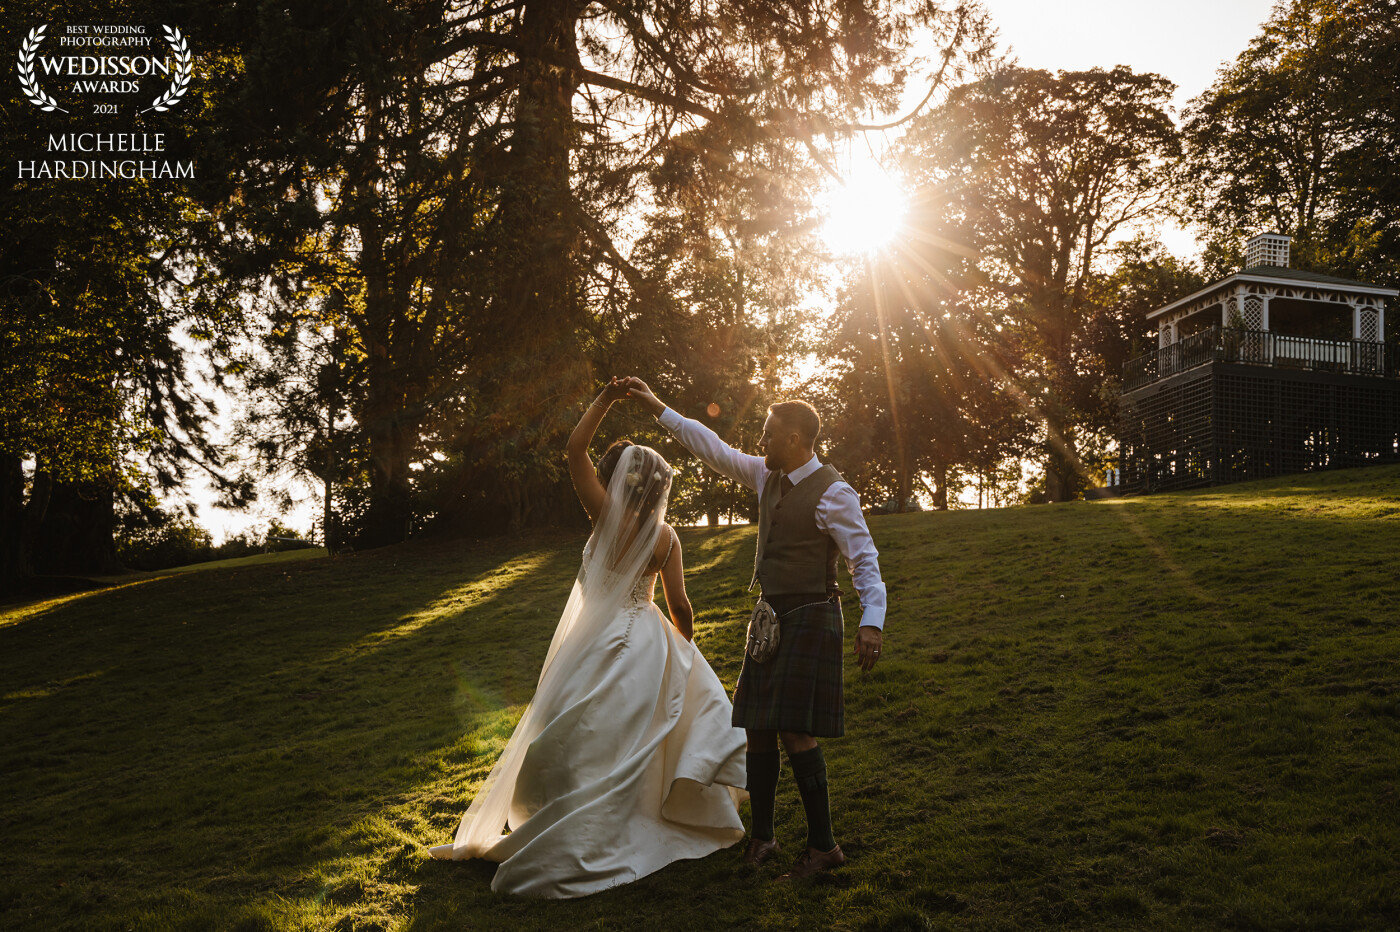 We made absolute perfect use of a rare heatwave in Scotland in September. Just dancing in the sunset on my beautiful newlyweds. A few moments after this Hamish the beautiful golden retriever came and nabbed the limelight! Well… he was adorable!